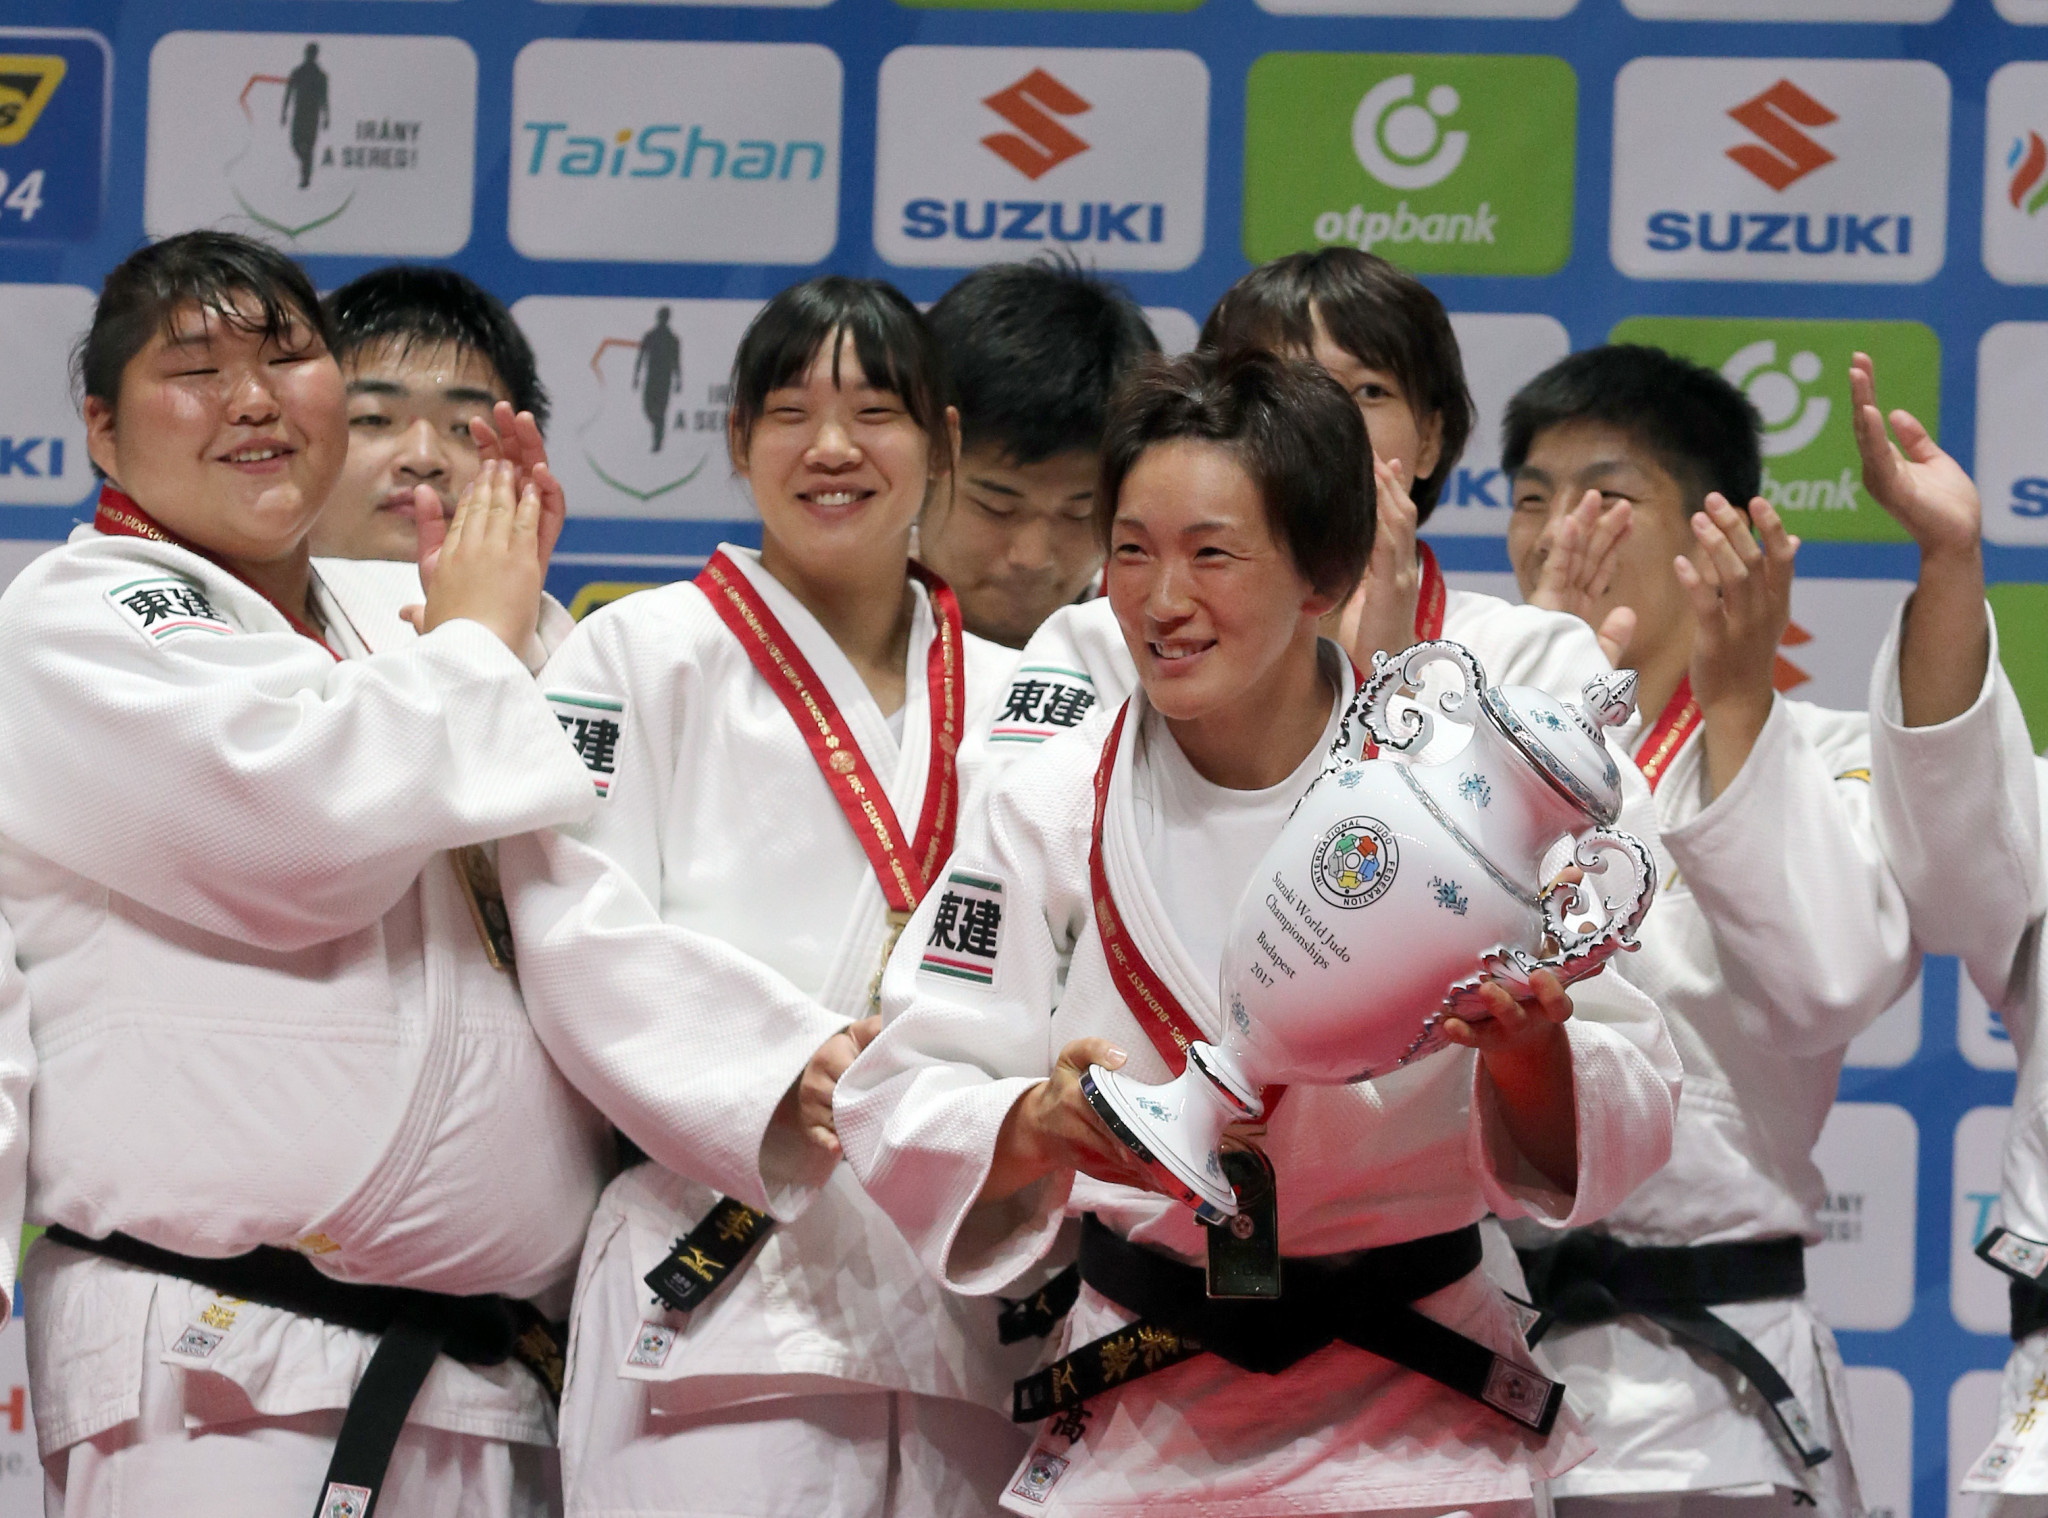 Gold winner Japan's team celebrates on the podium of the team event at the World Judo Championships in Budapest on September 3, 2017 ©Getty Images